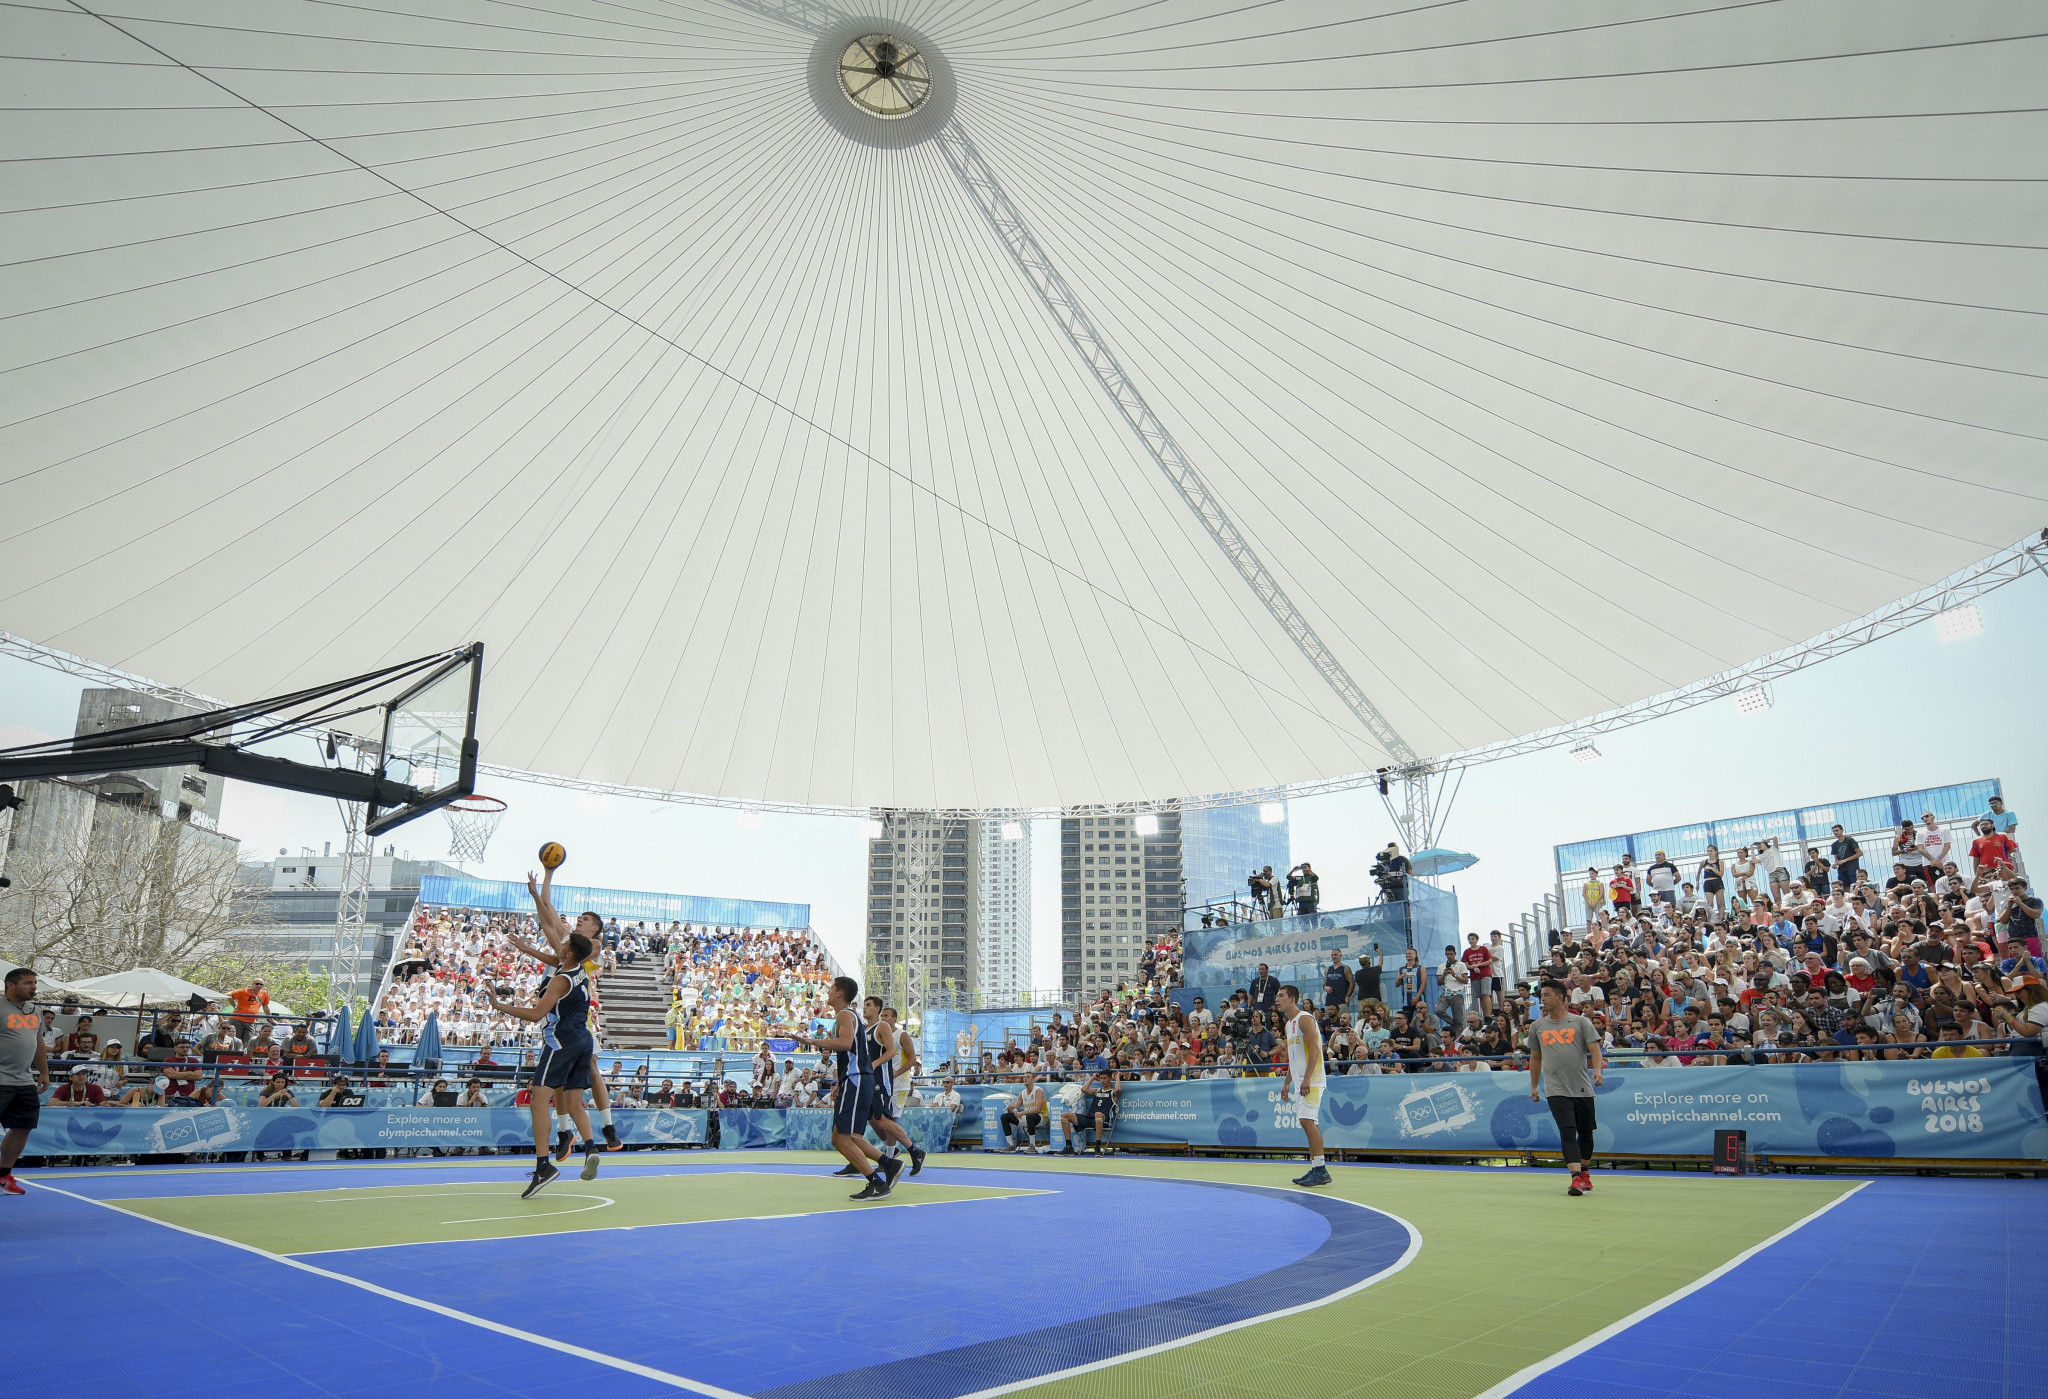 3x3 basketball, which has been part of the Youth Olympics since 2010, will make its debut at a senior Olympics at Tokyo 2020 ©Getty Images